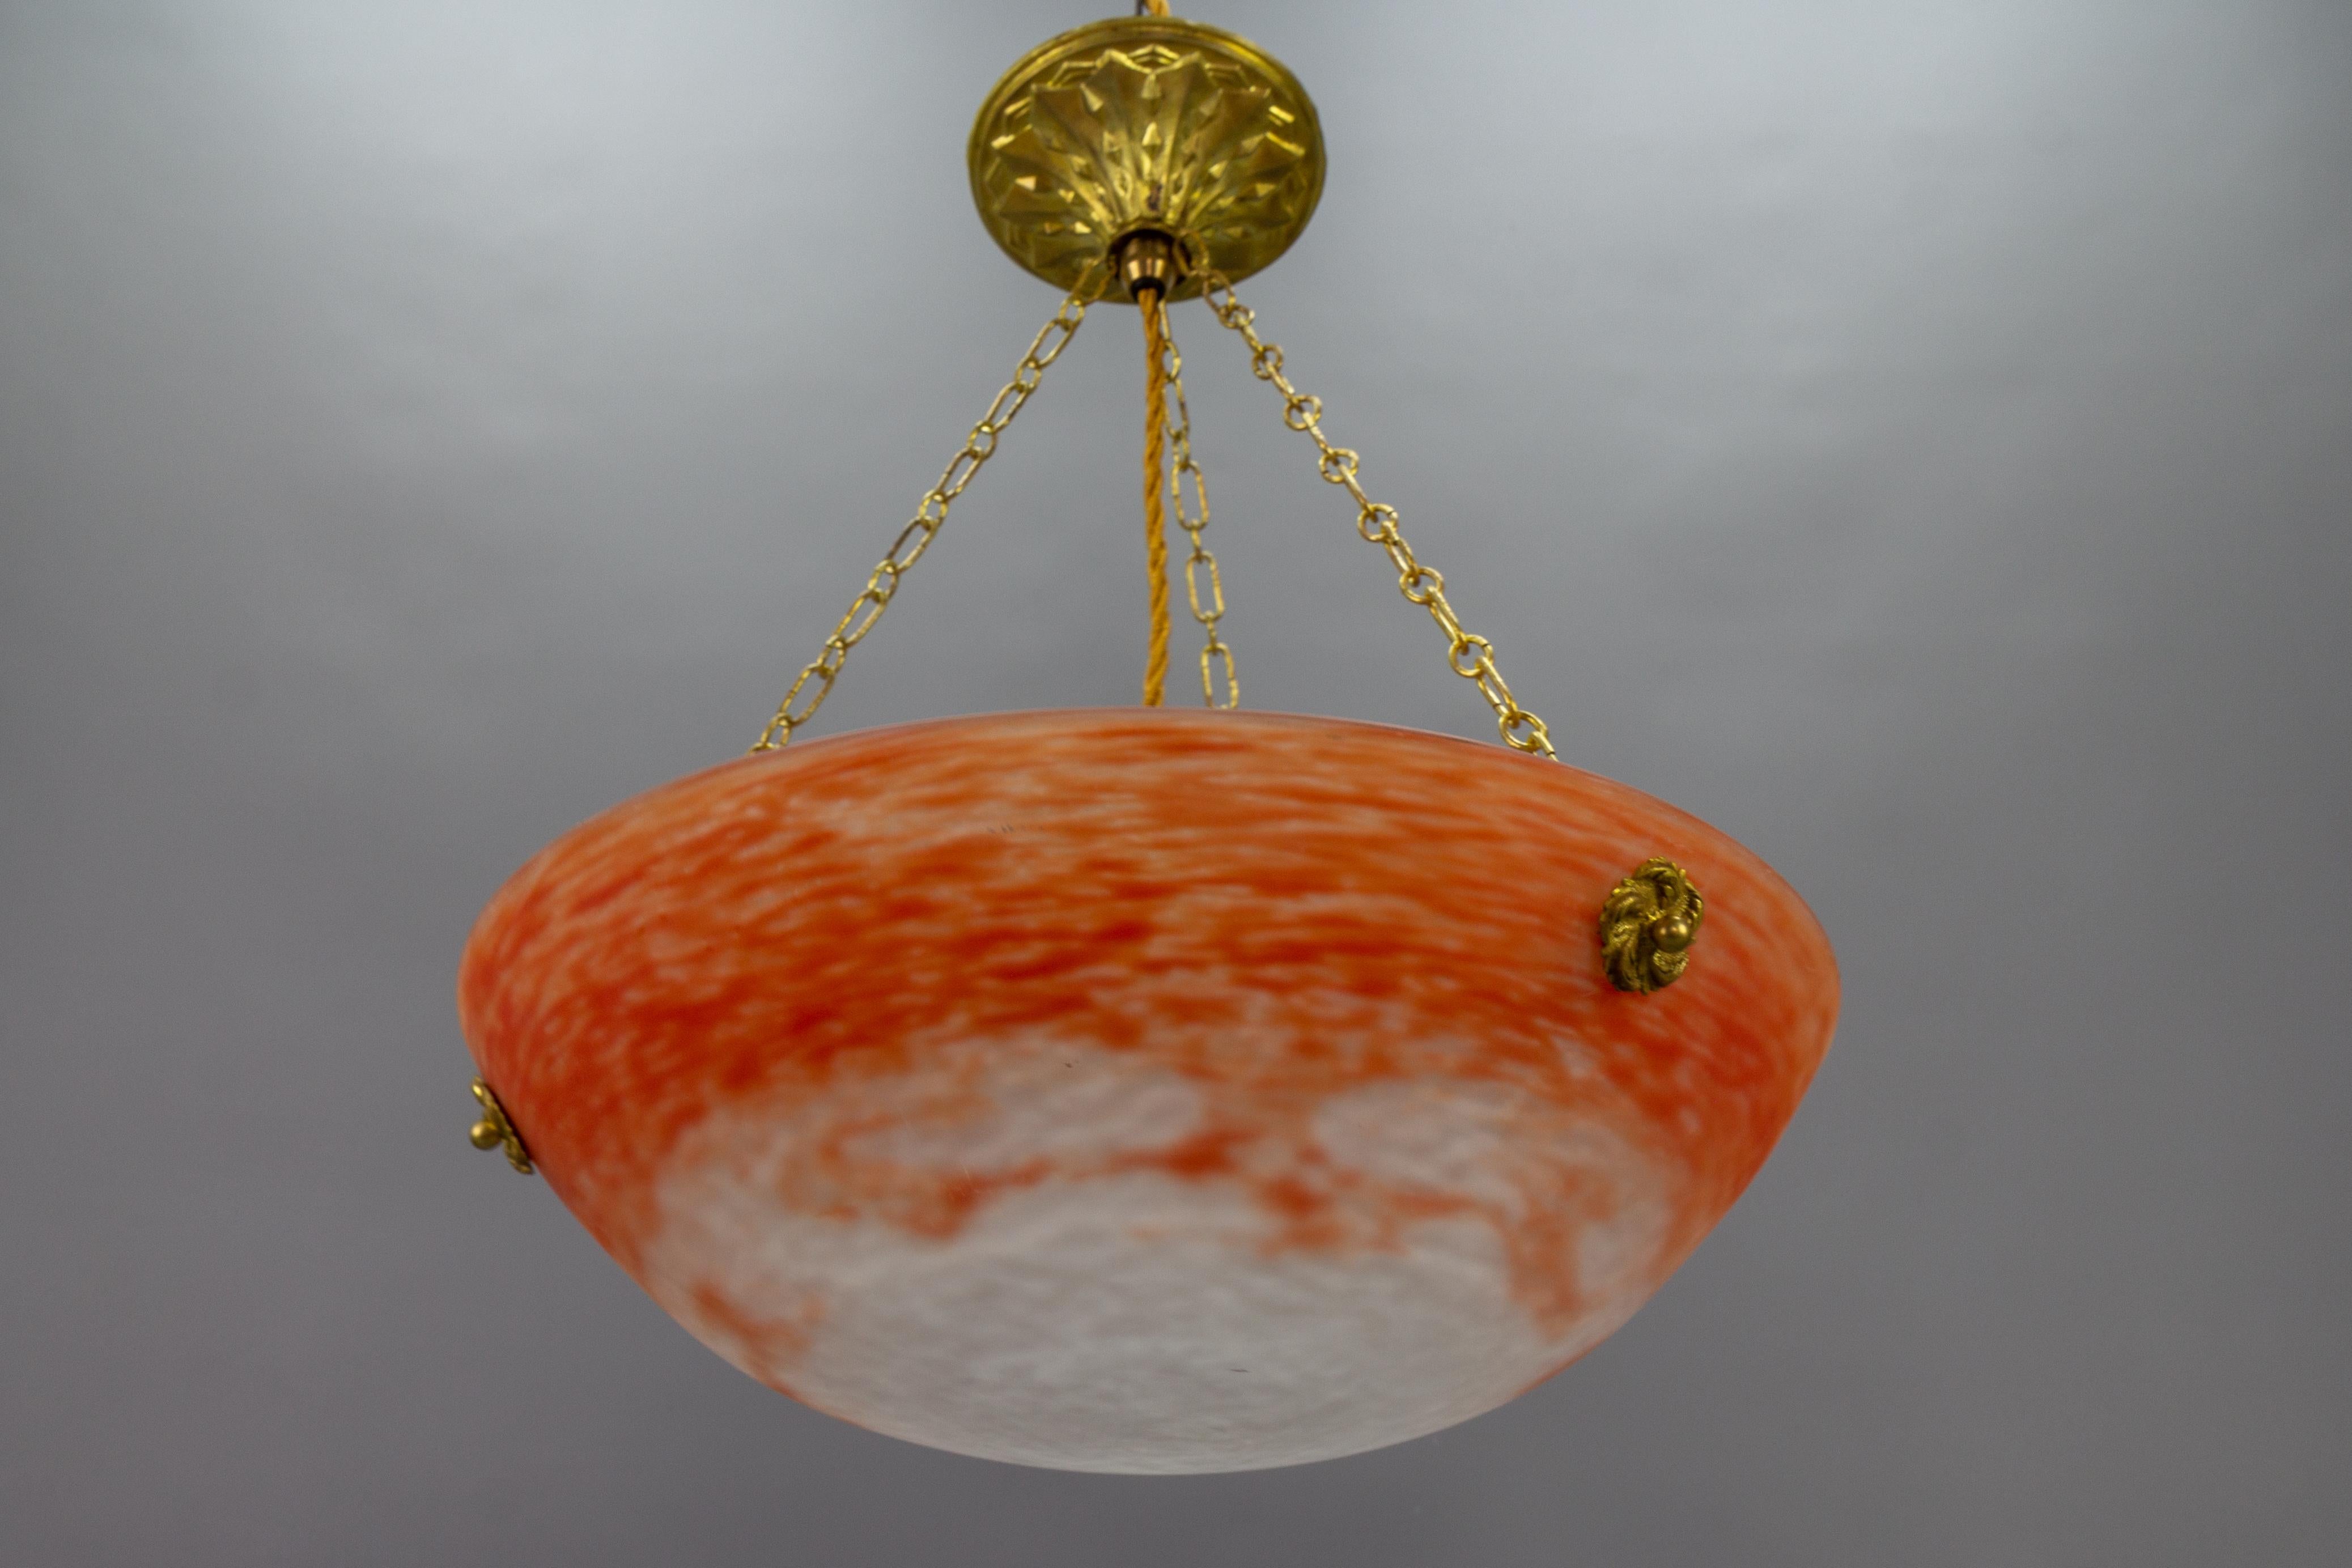 French Art Nouveau Orange and White Glass Pendant Light Signed Noverdy, 1920s For Sale 2